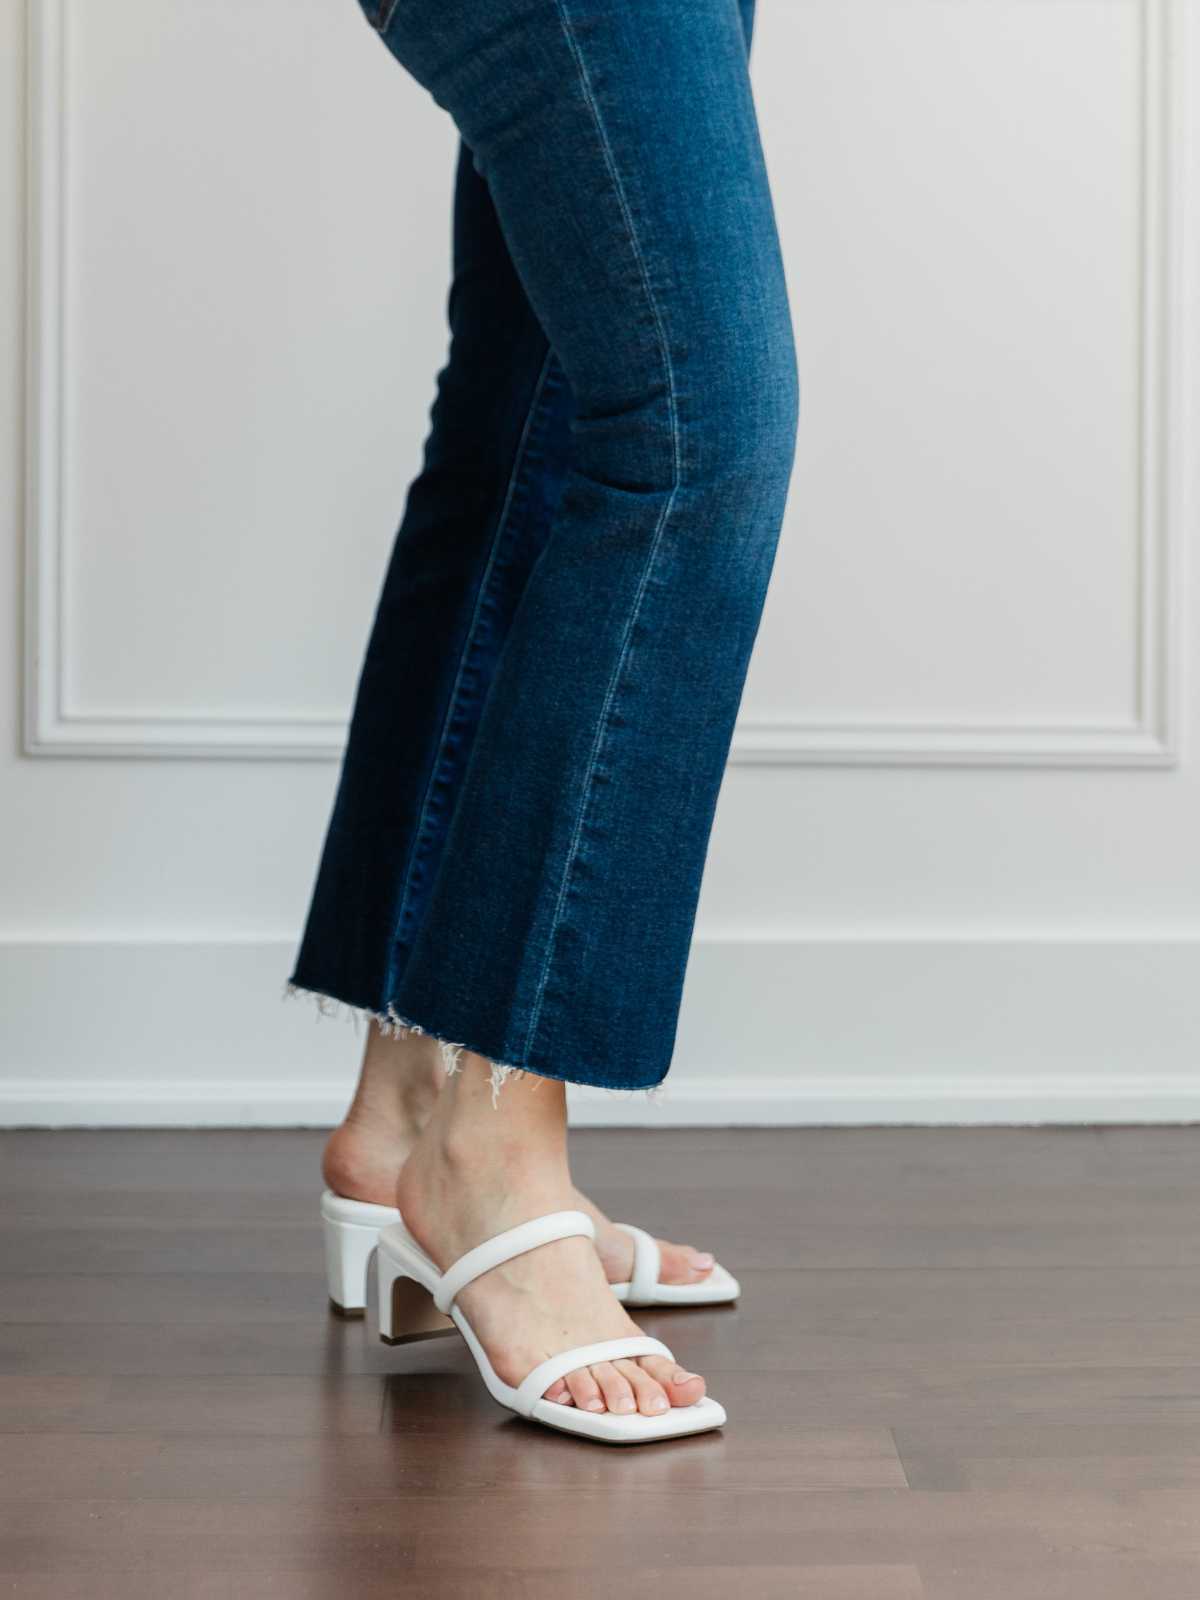 Cropped view of woman's legs wearing  minimal slide sandals with kick flares